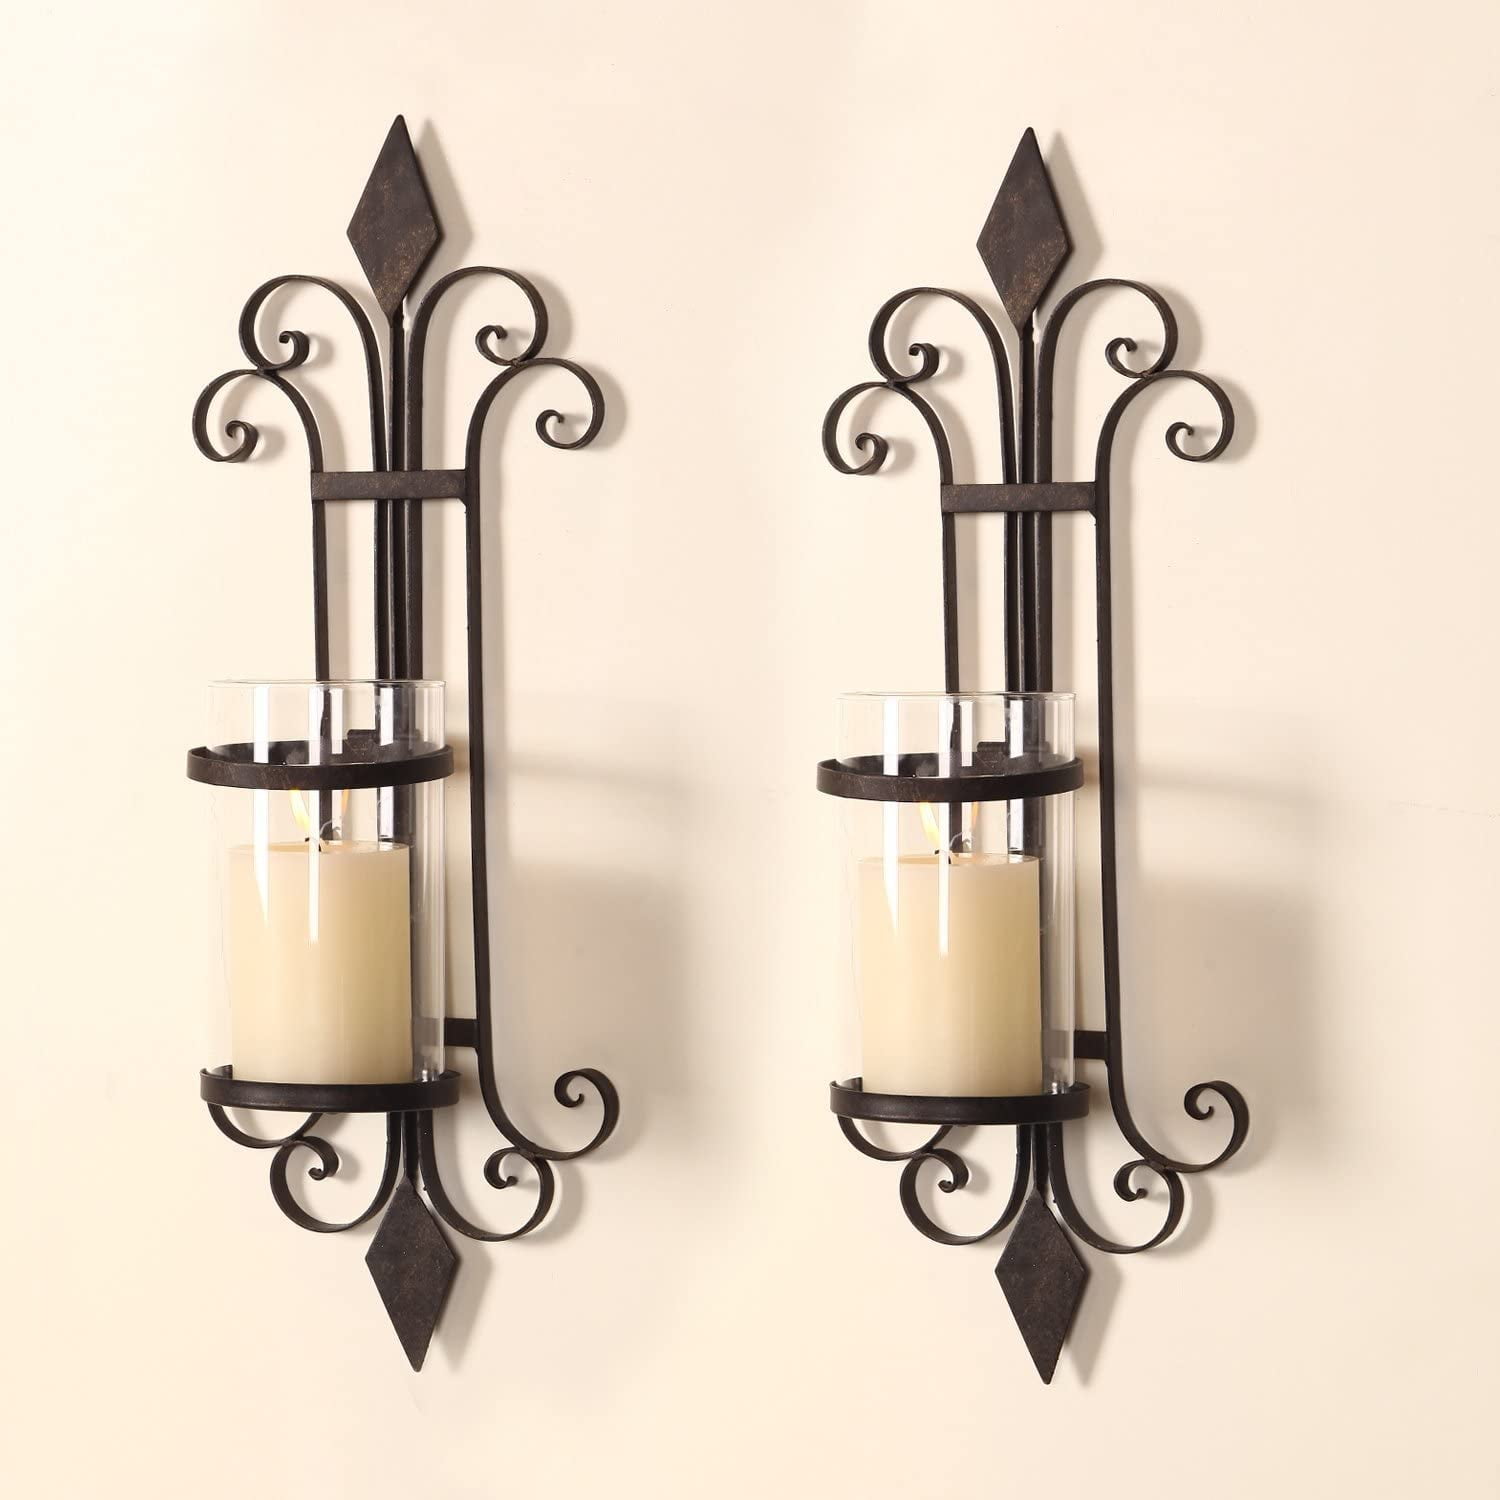 Vintage Wall Mounted Sconce Tealight Candle Holder Candlestick Decor Black